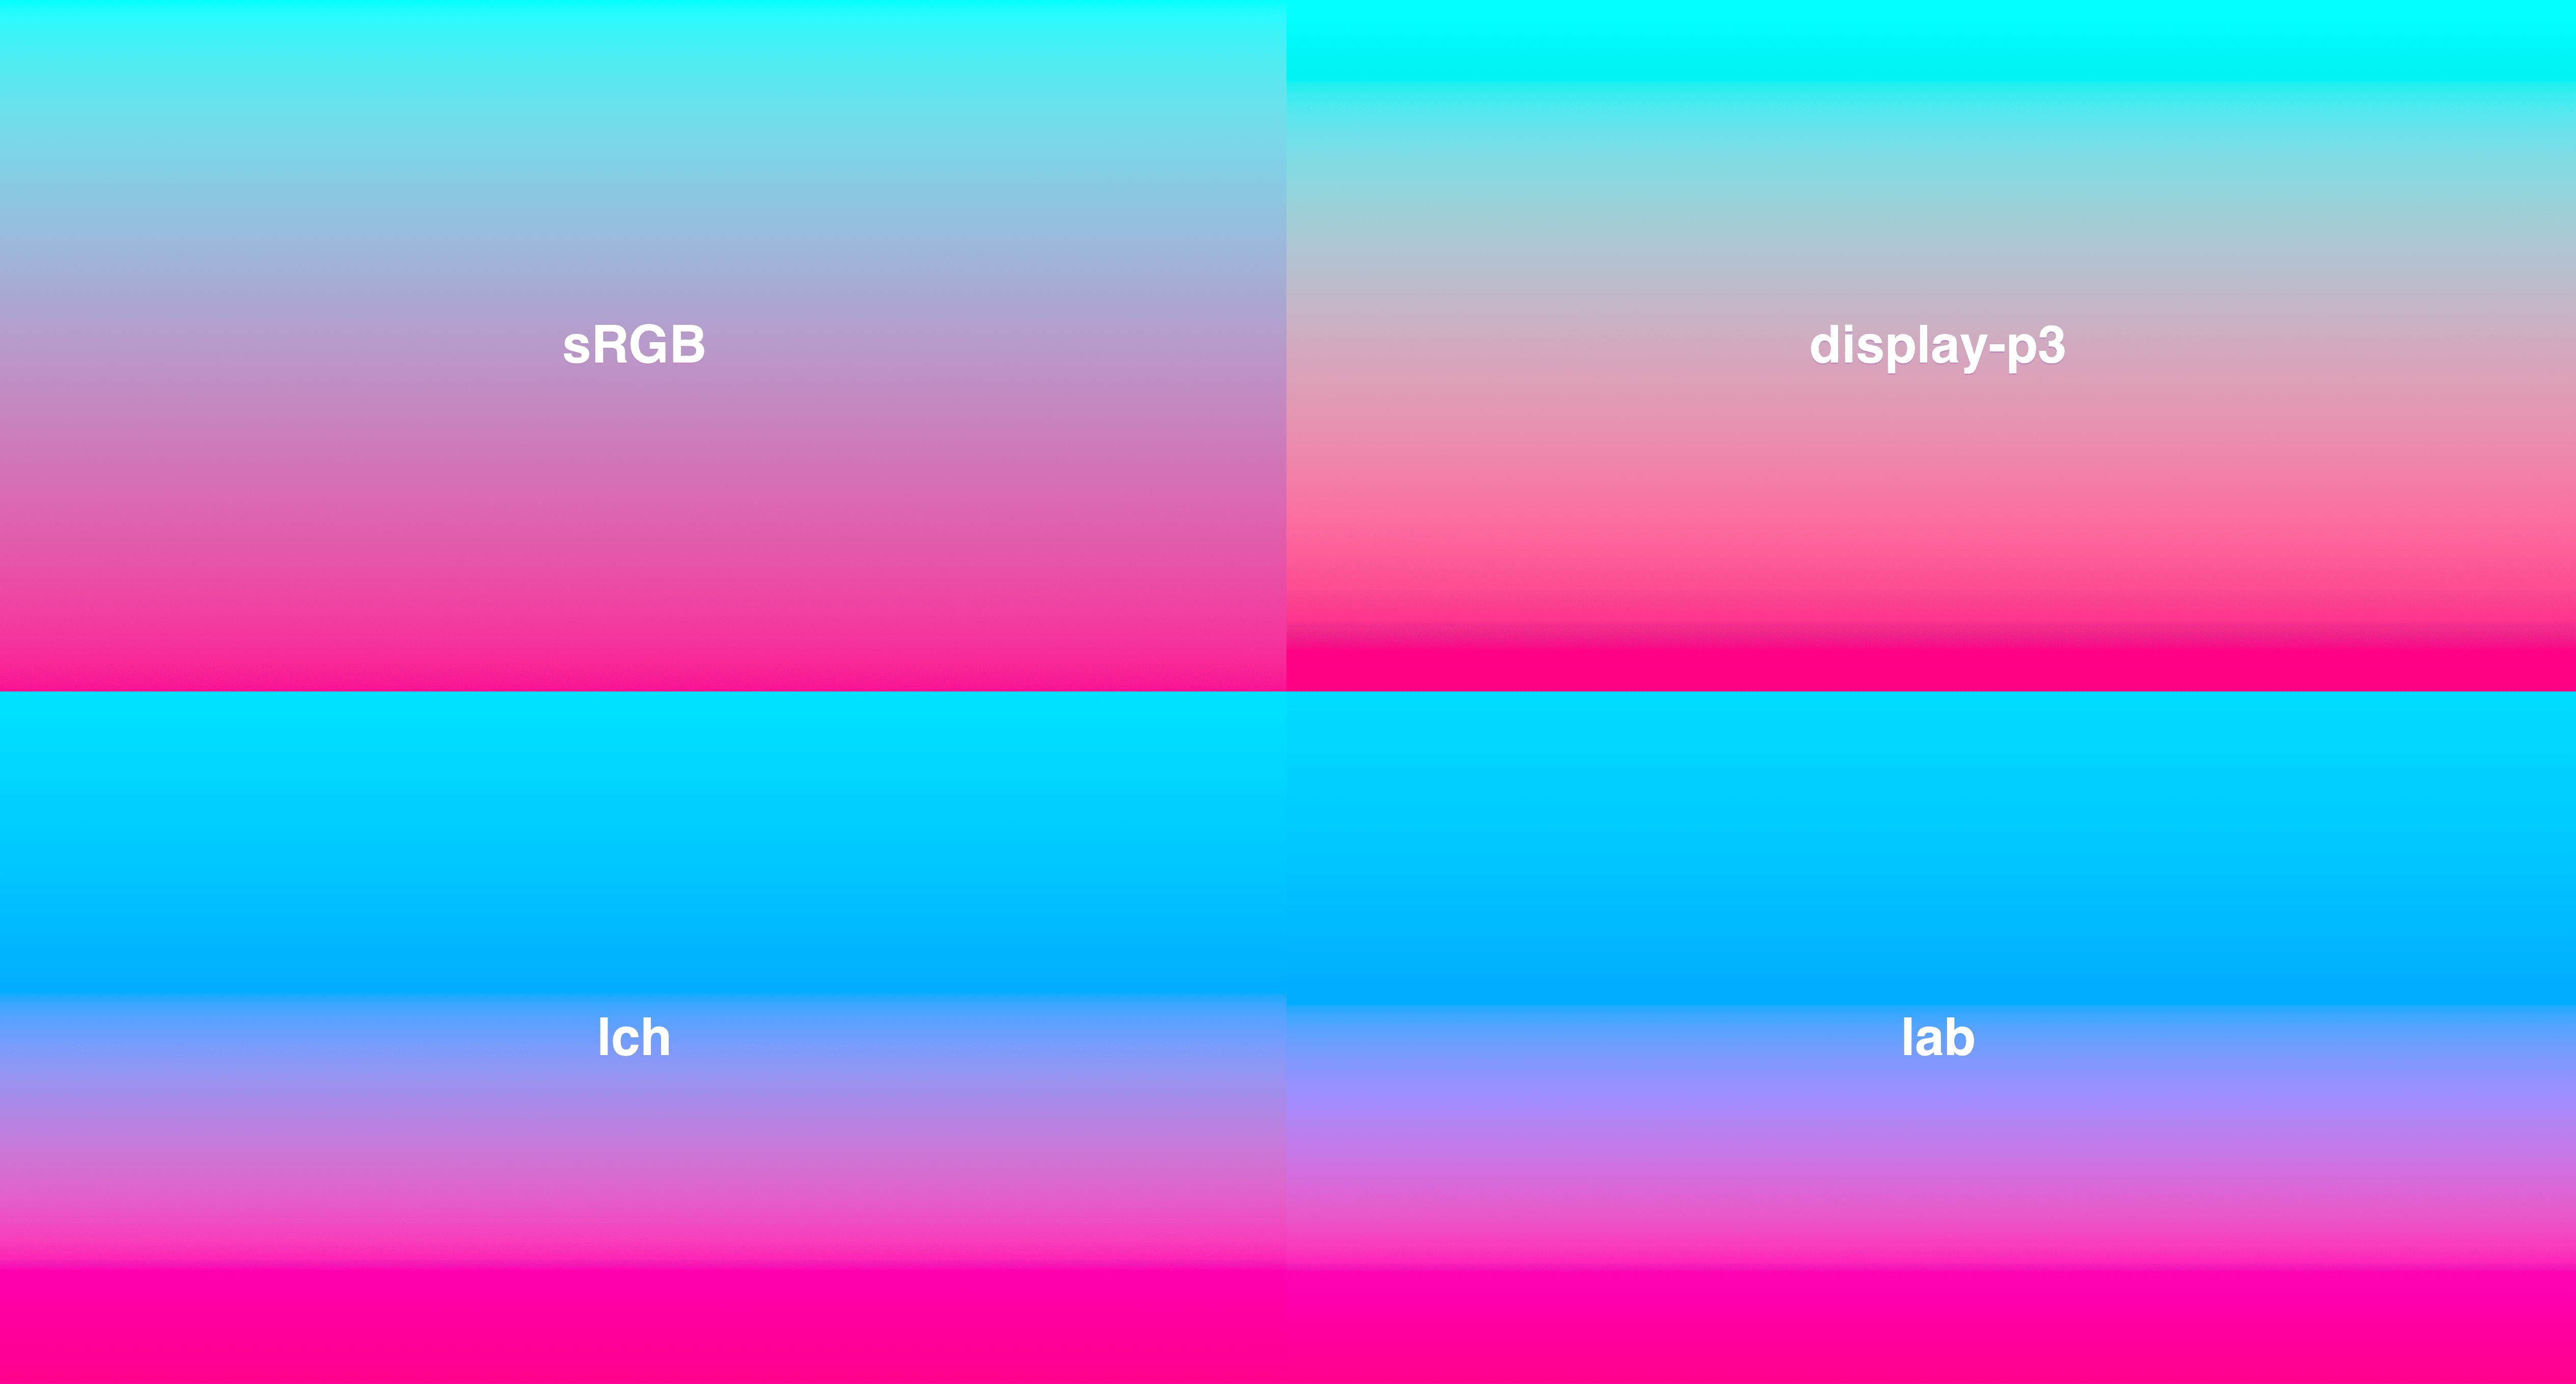 4 gradients in a grid, all from cyan to deeppink. LCH and LAB have more consistent vibrancy, where sRGB goes a bit desaturated in the middle.